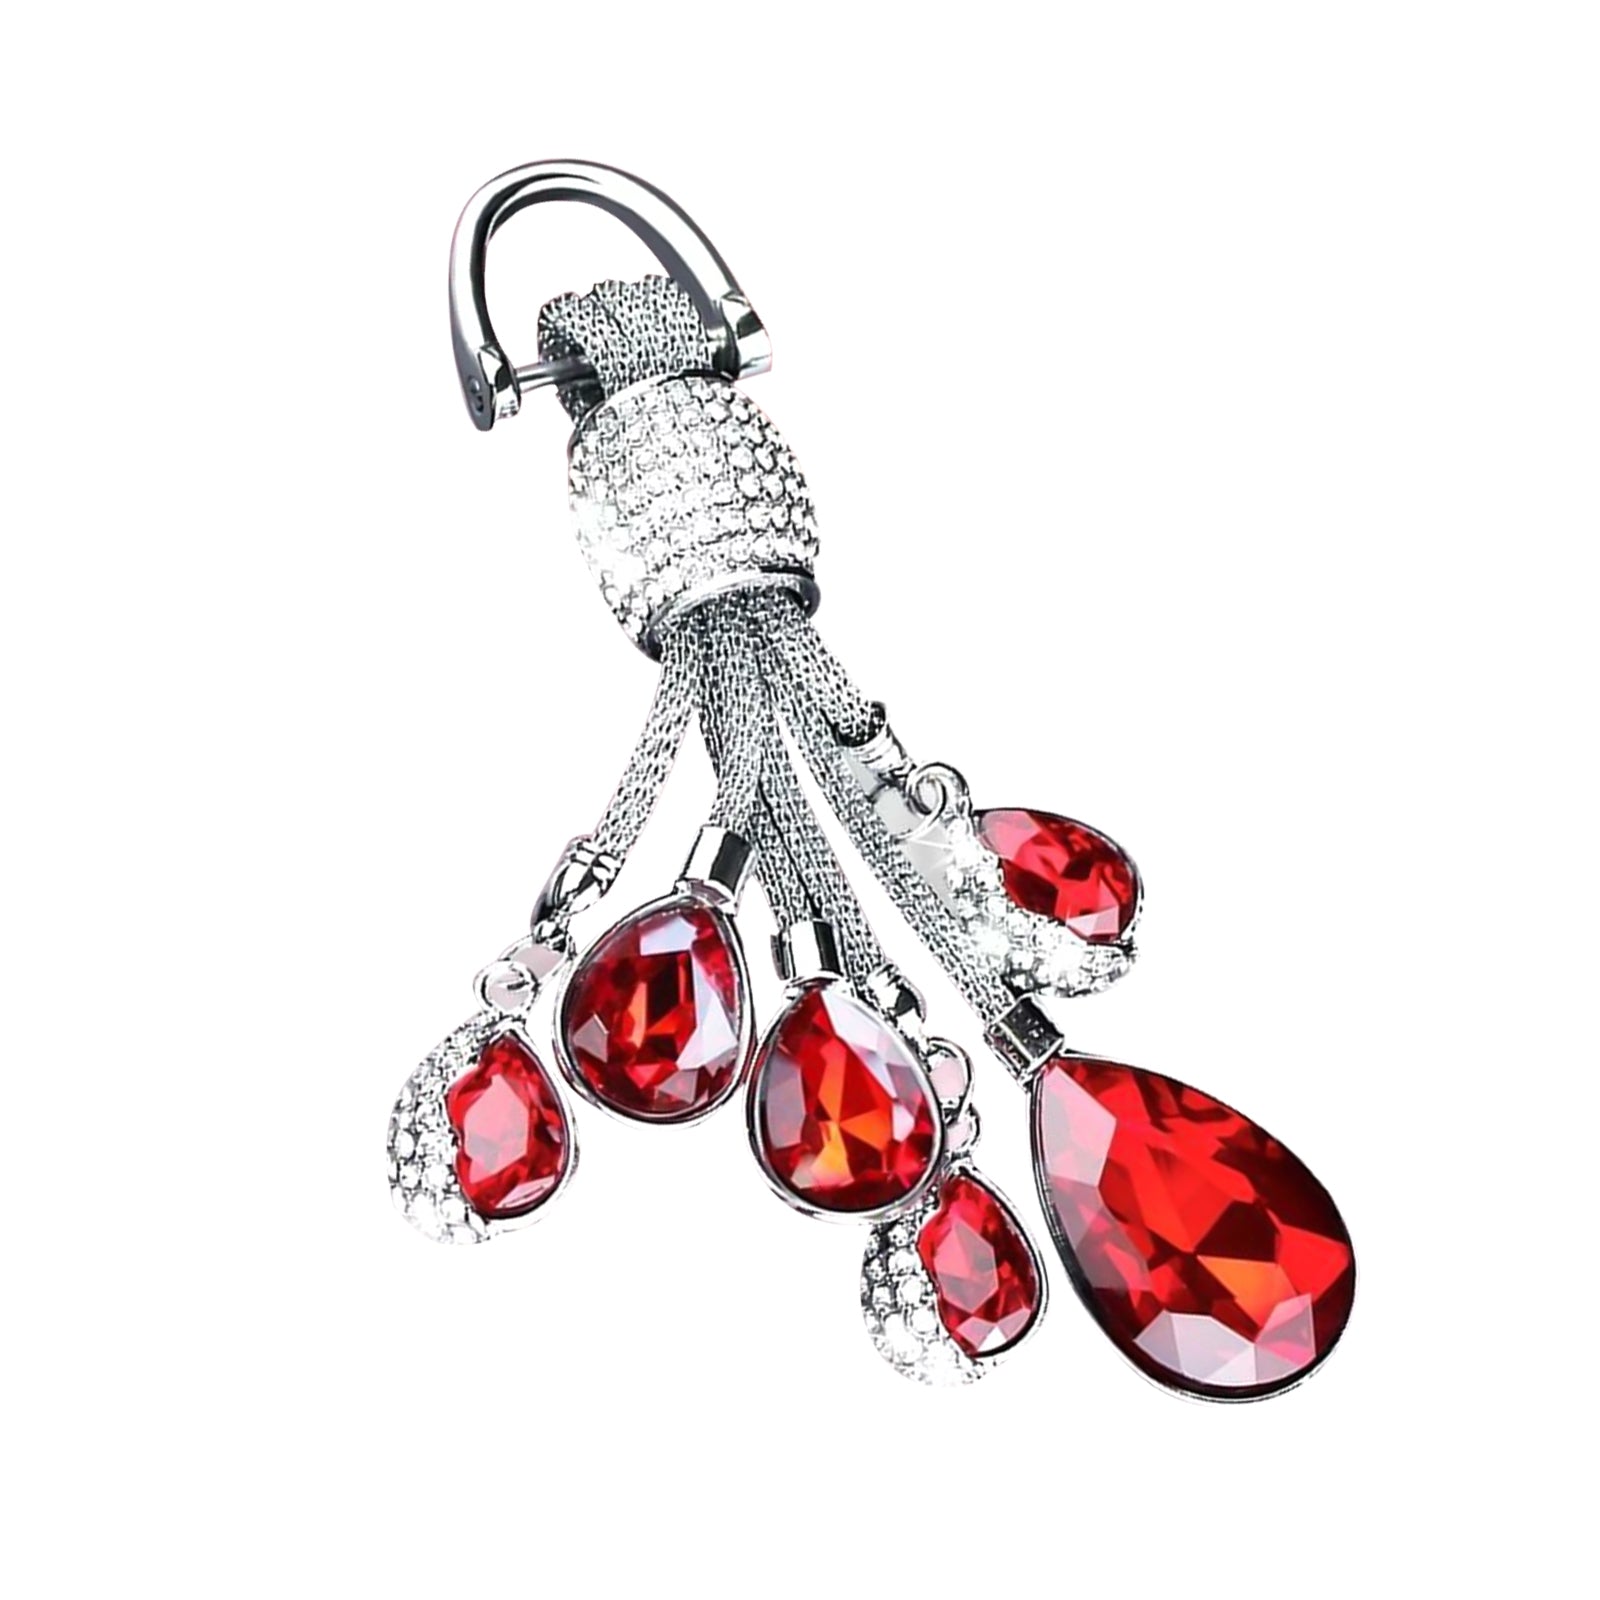 Avenue Zoe Accessories | Stars Glitters Filled Tube Key Ring Red